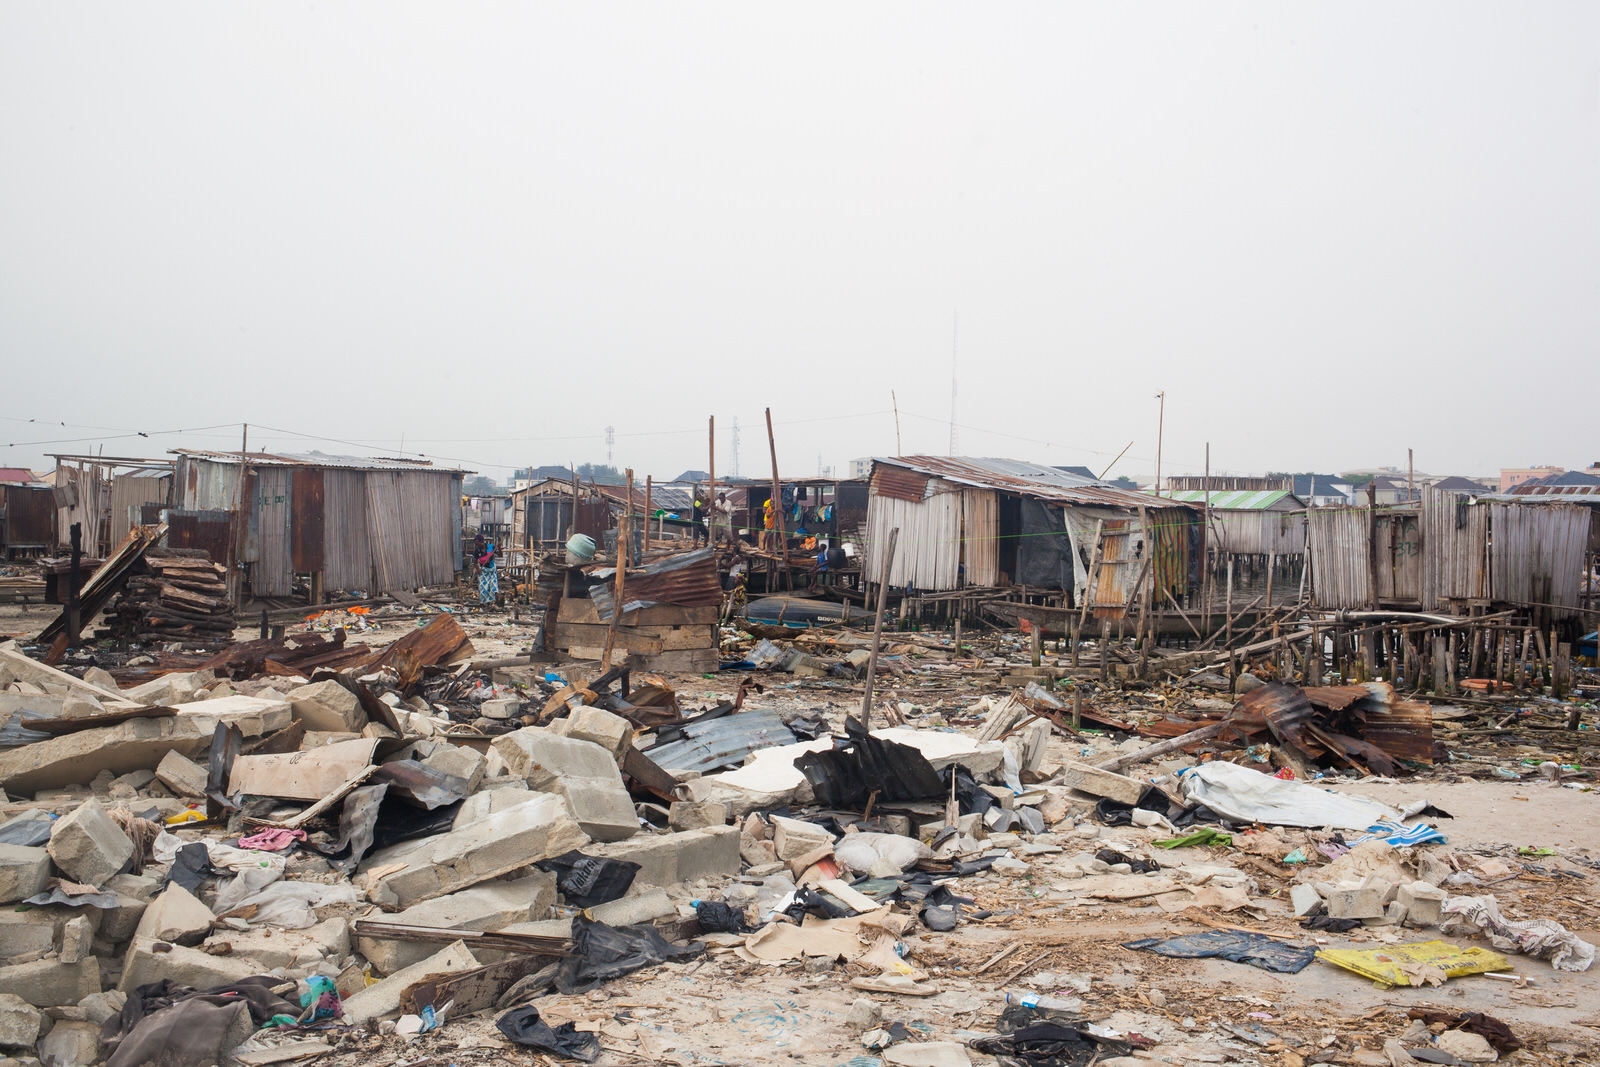  The small fishing community of Otodo Gbame is one of many waterfront settlements in Lagos that is under constant threat of eviction. In November 2016 homes were destroyed and thousands of residents forced to flee. 